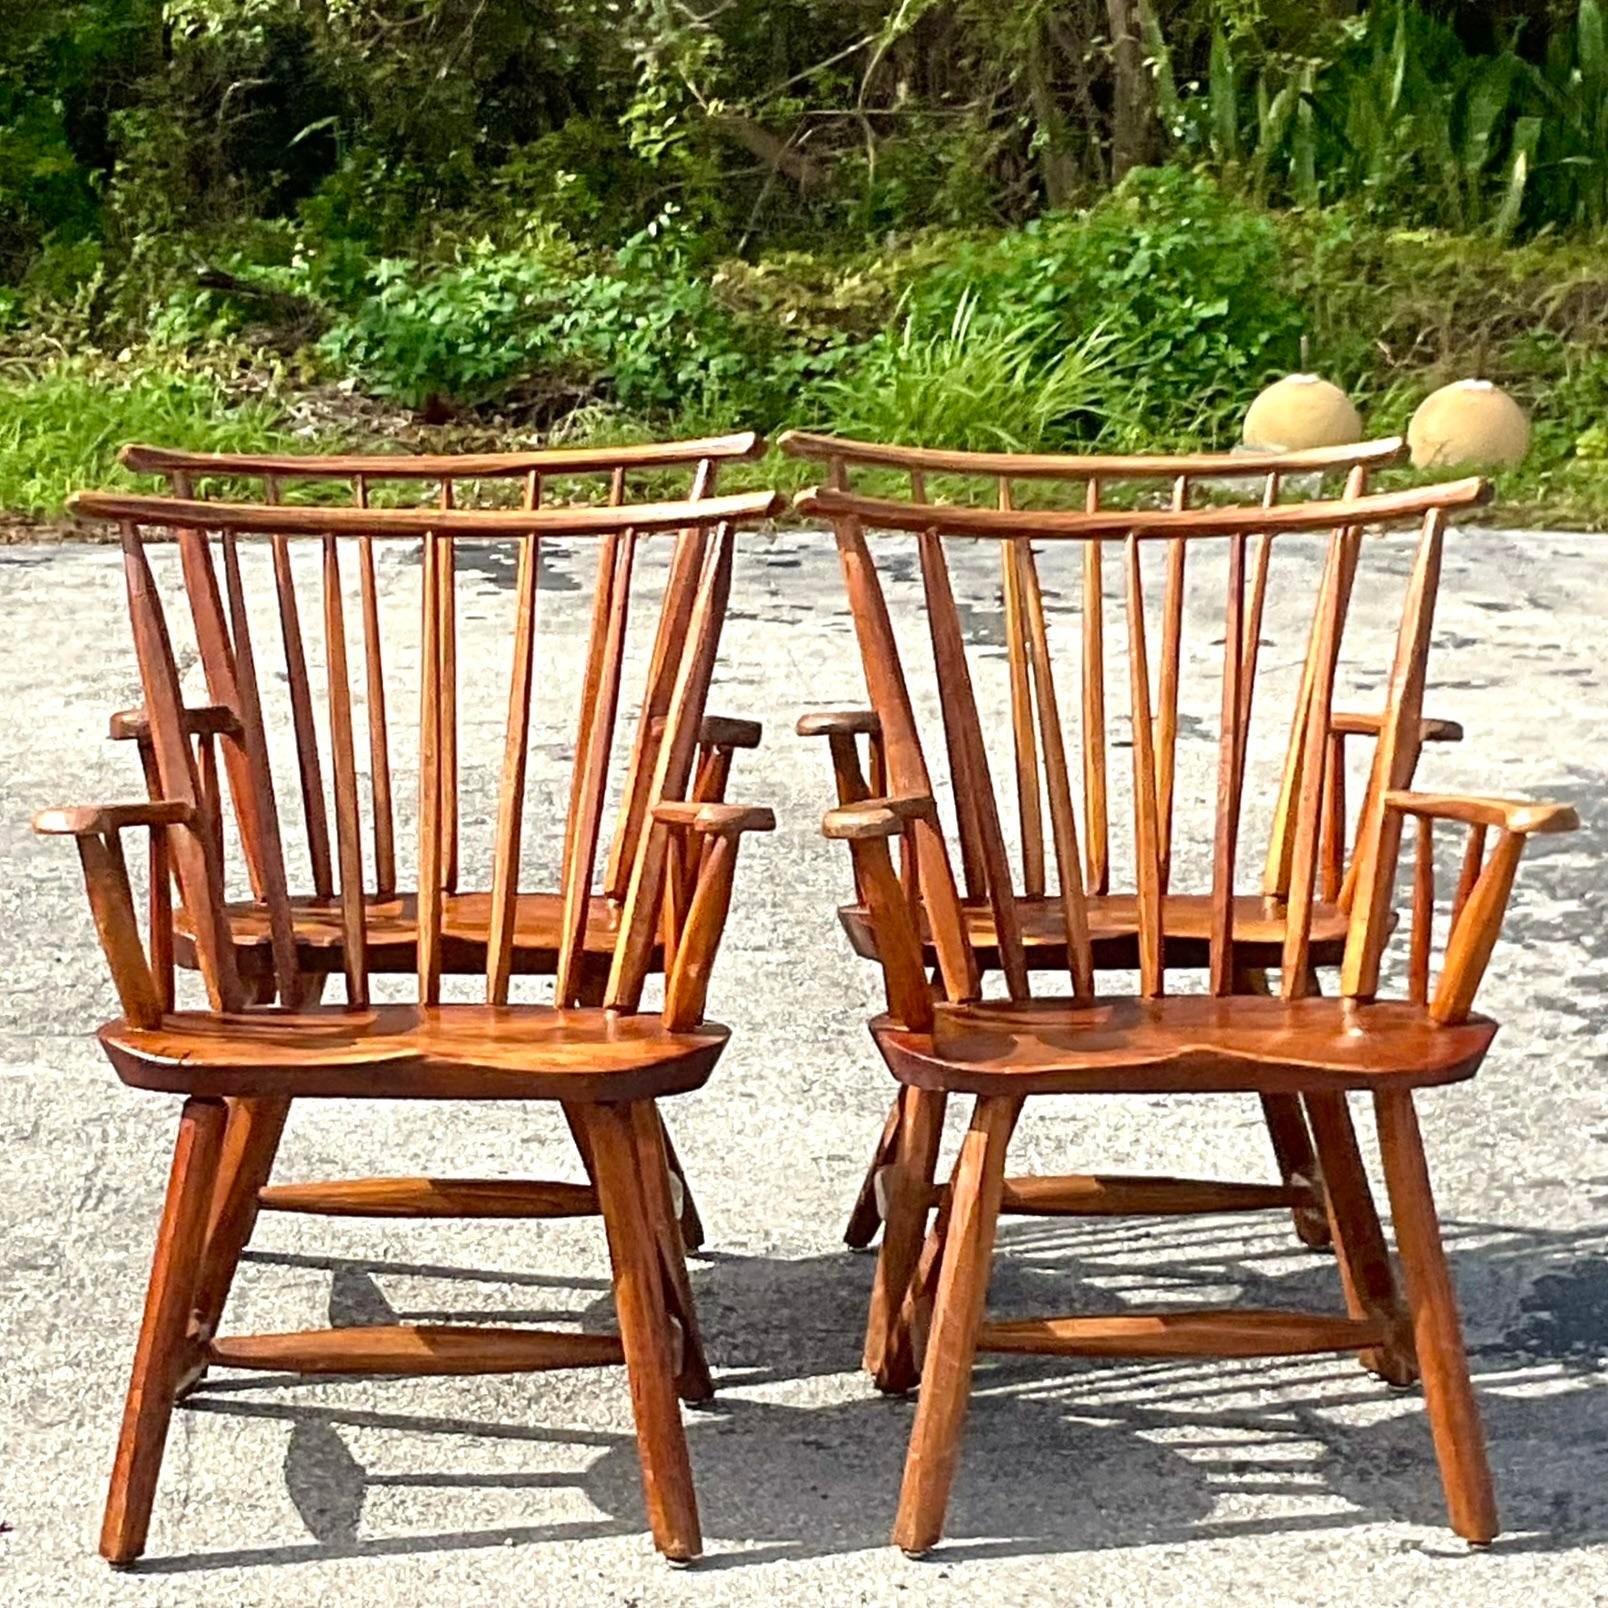 A fantastic set of four vintage Boho dining chairs. A chic primitive hand carved design with a spindle back design. Beautiful all over patina from time. Acquired from a Palm Beach estate.